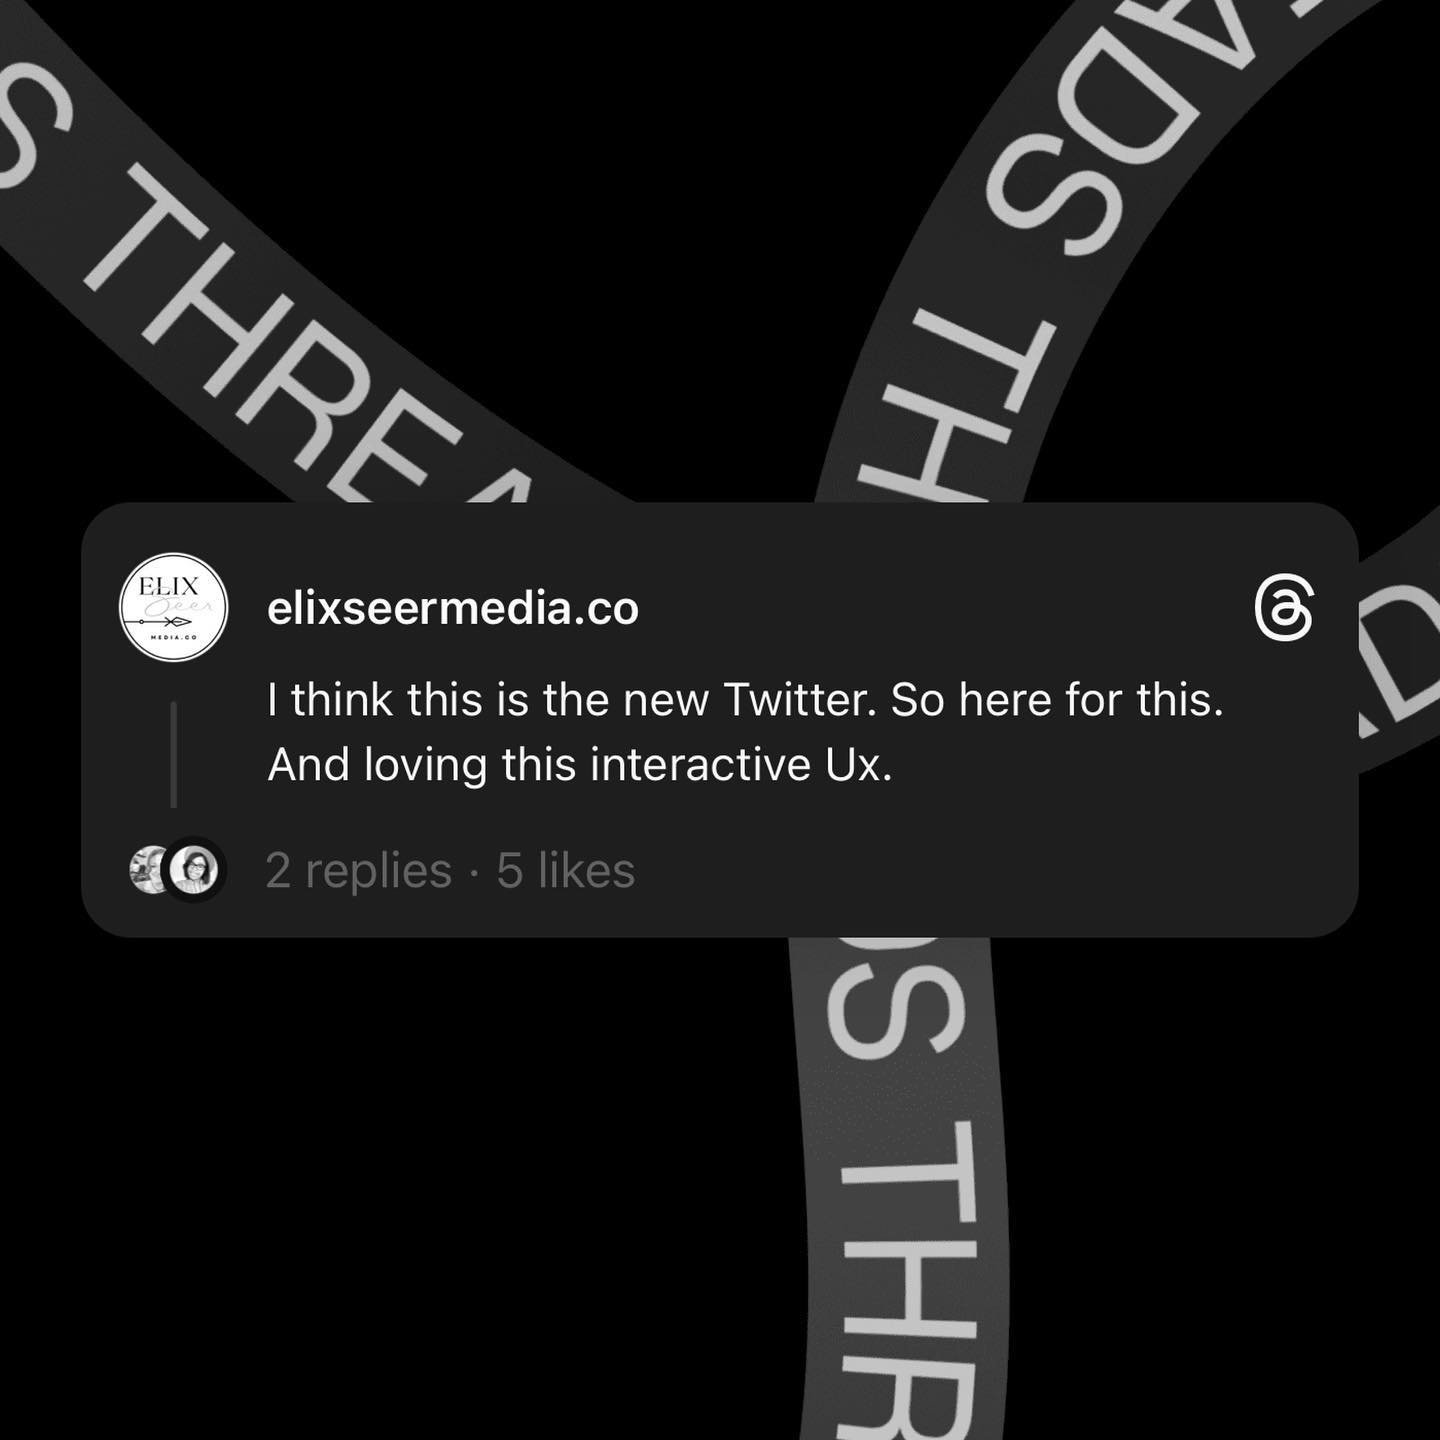 Twitter but MEGA better. Different. 

Loving the new @threadsapp &mdash; its interactive UX. 

And the fact that it is so fluid between IG, easily connect with your community on there too, and meet new folks too! 

PLUS you can easily share your thre